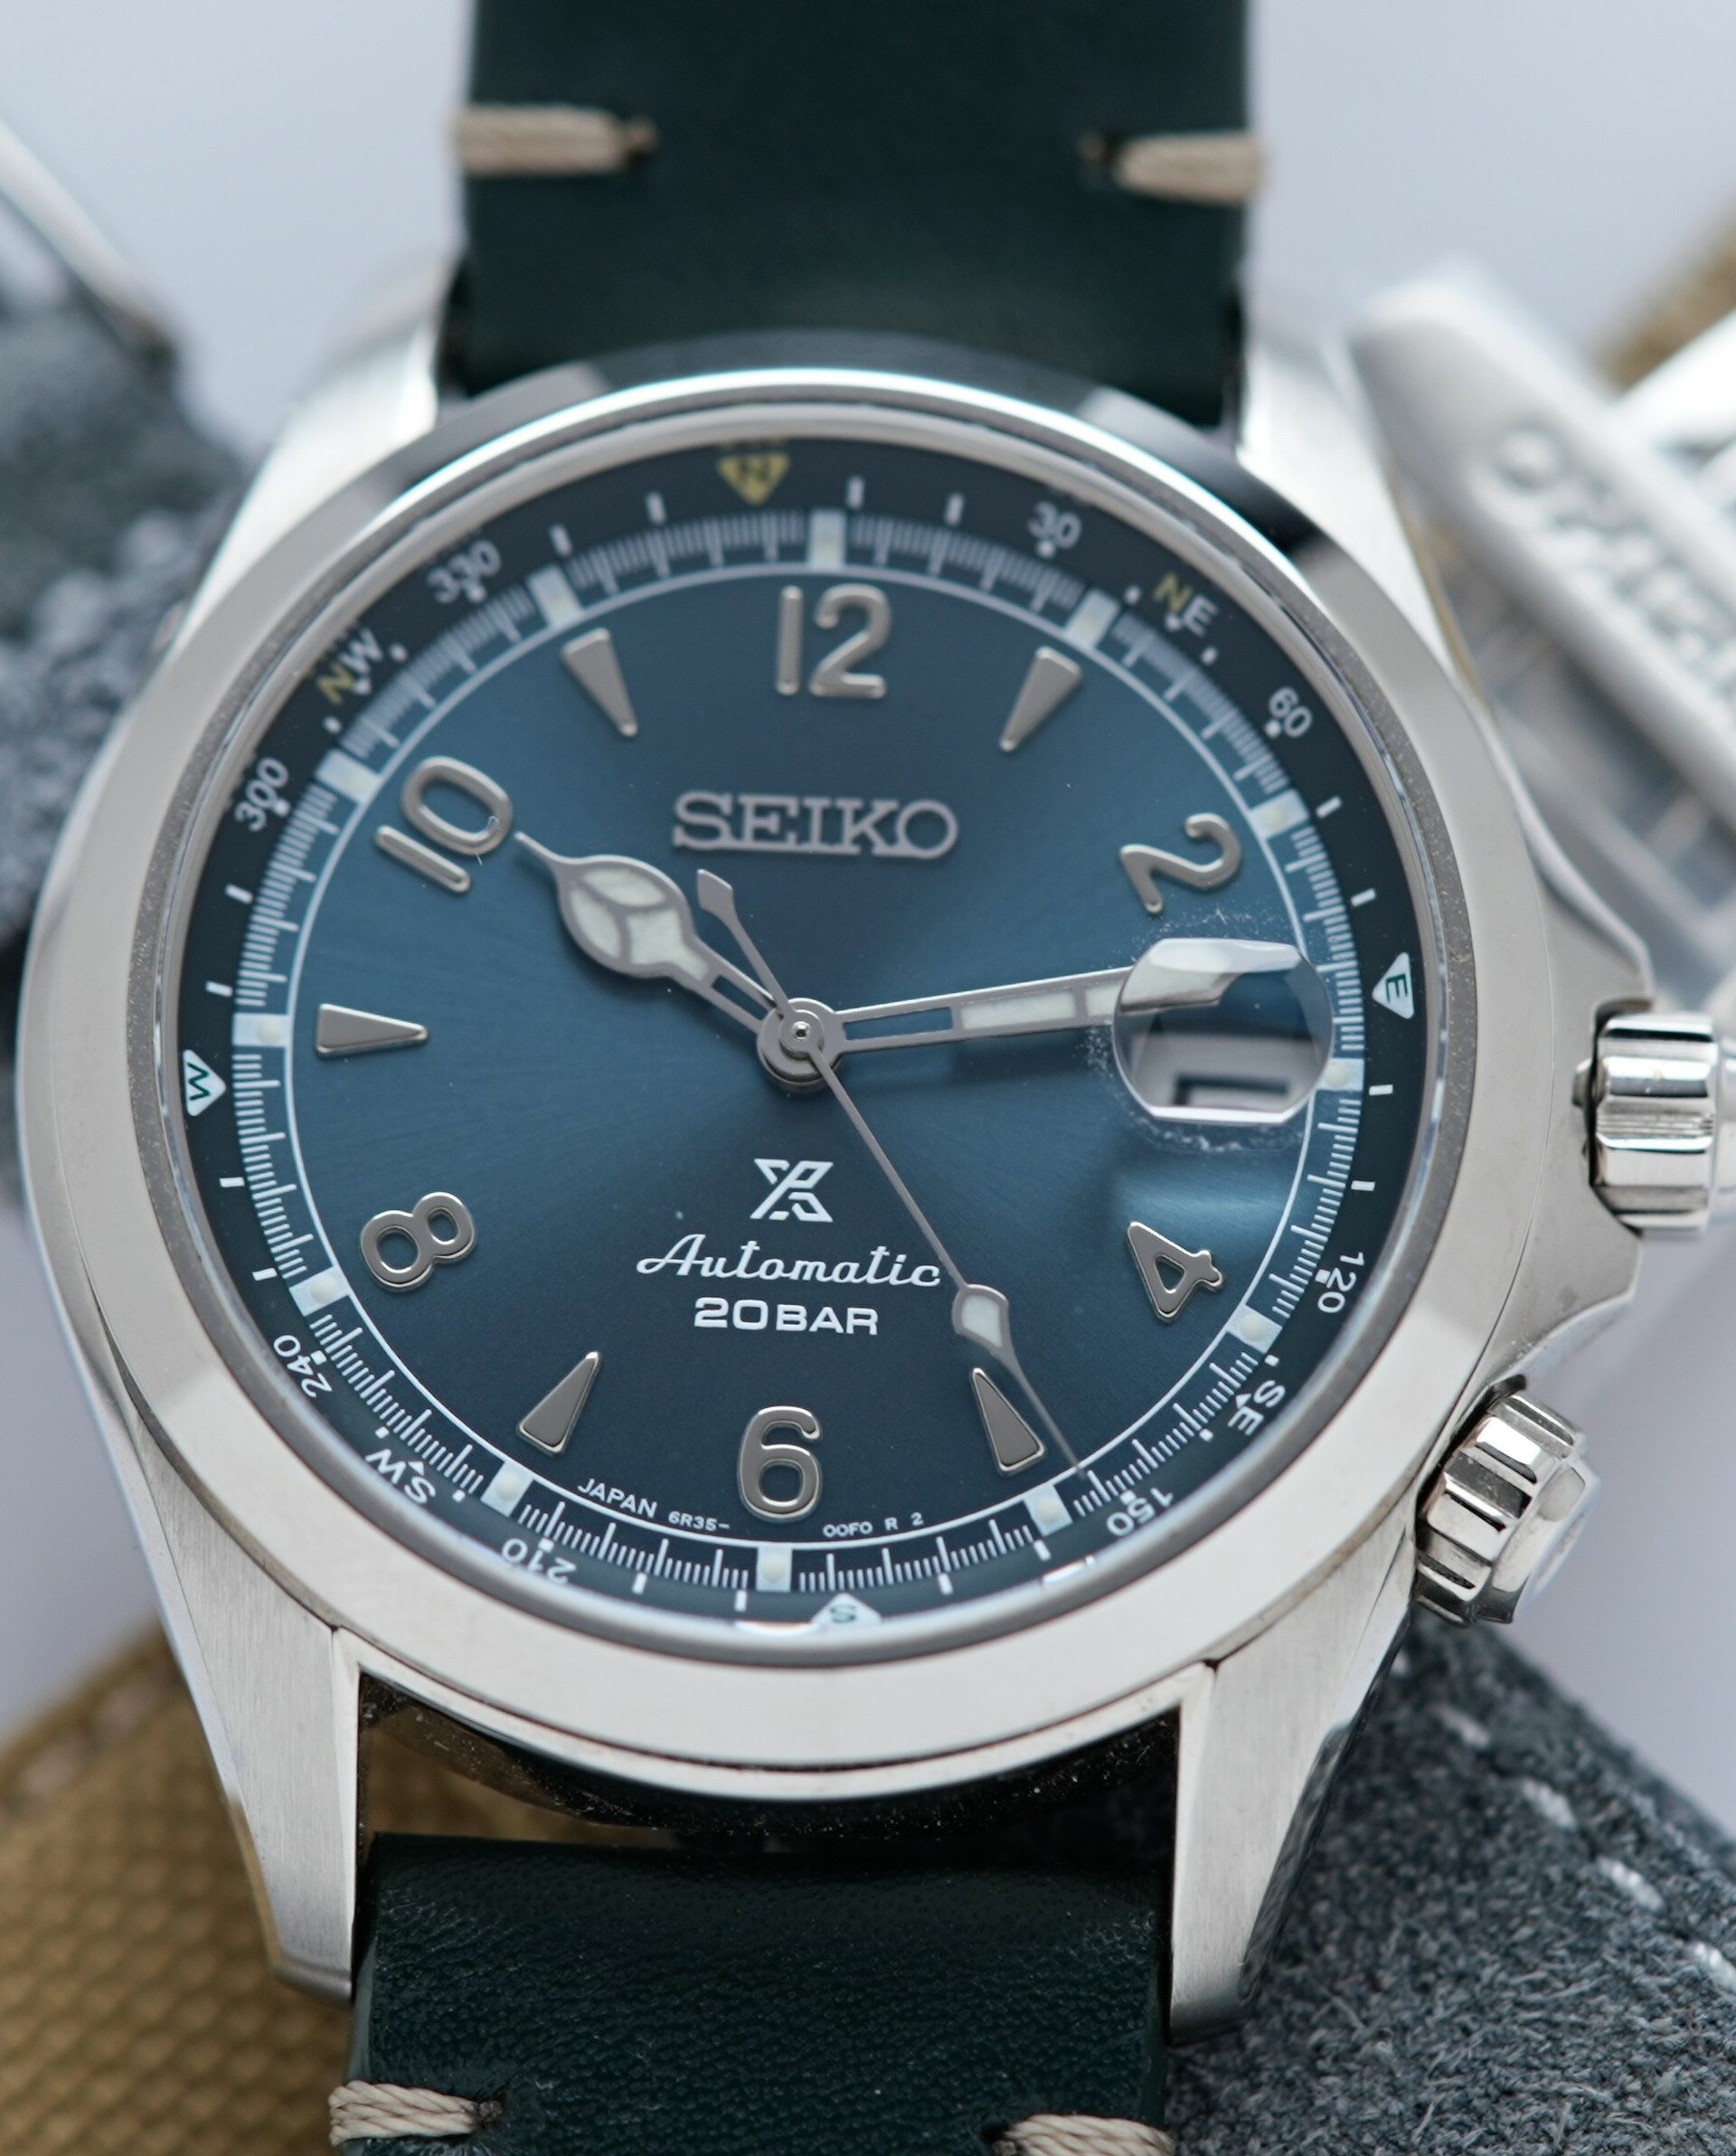 Seiko Alpinist Limited Edition Alpinist Mountain Glacier SPB199J1 watch on display along with two additional straps in the background.